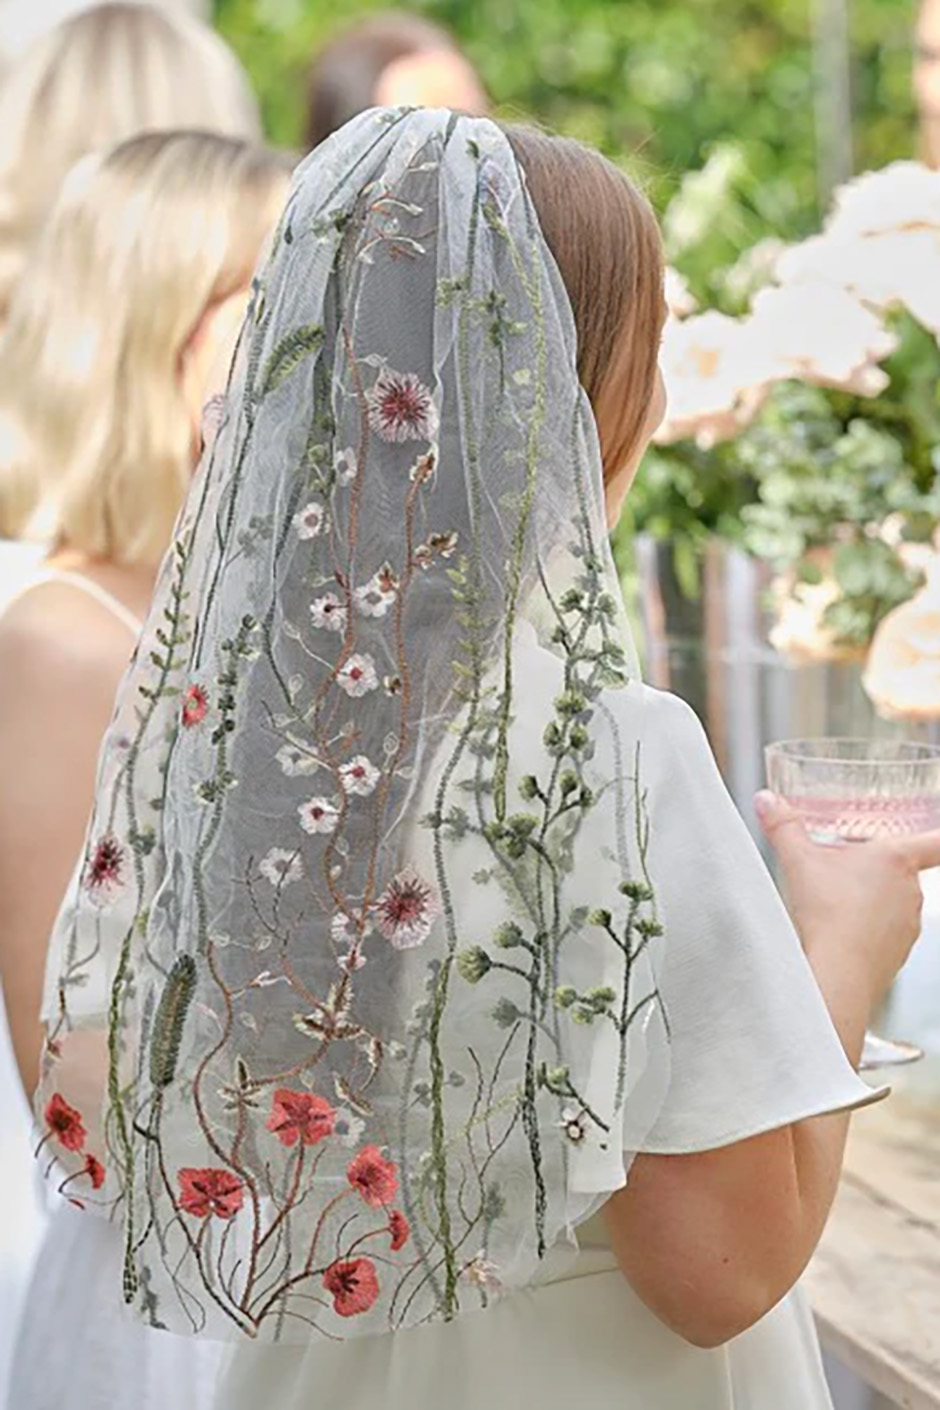 Floral embroidered veil for Love in Bloom hen parties from Team Hen